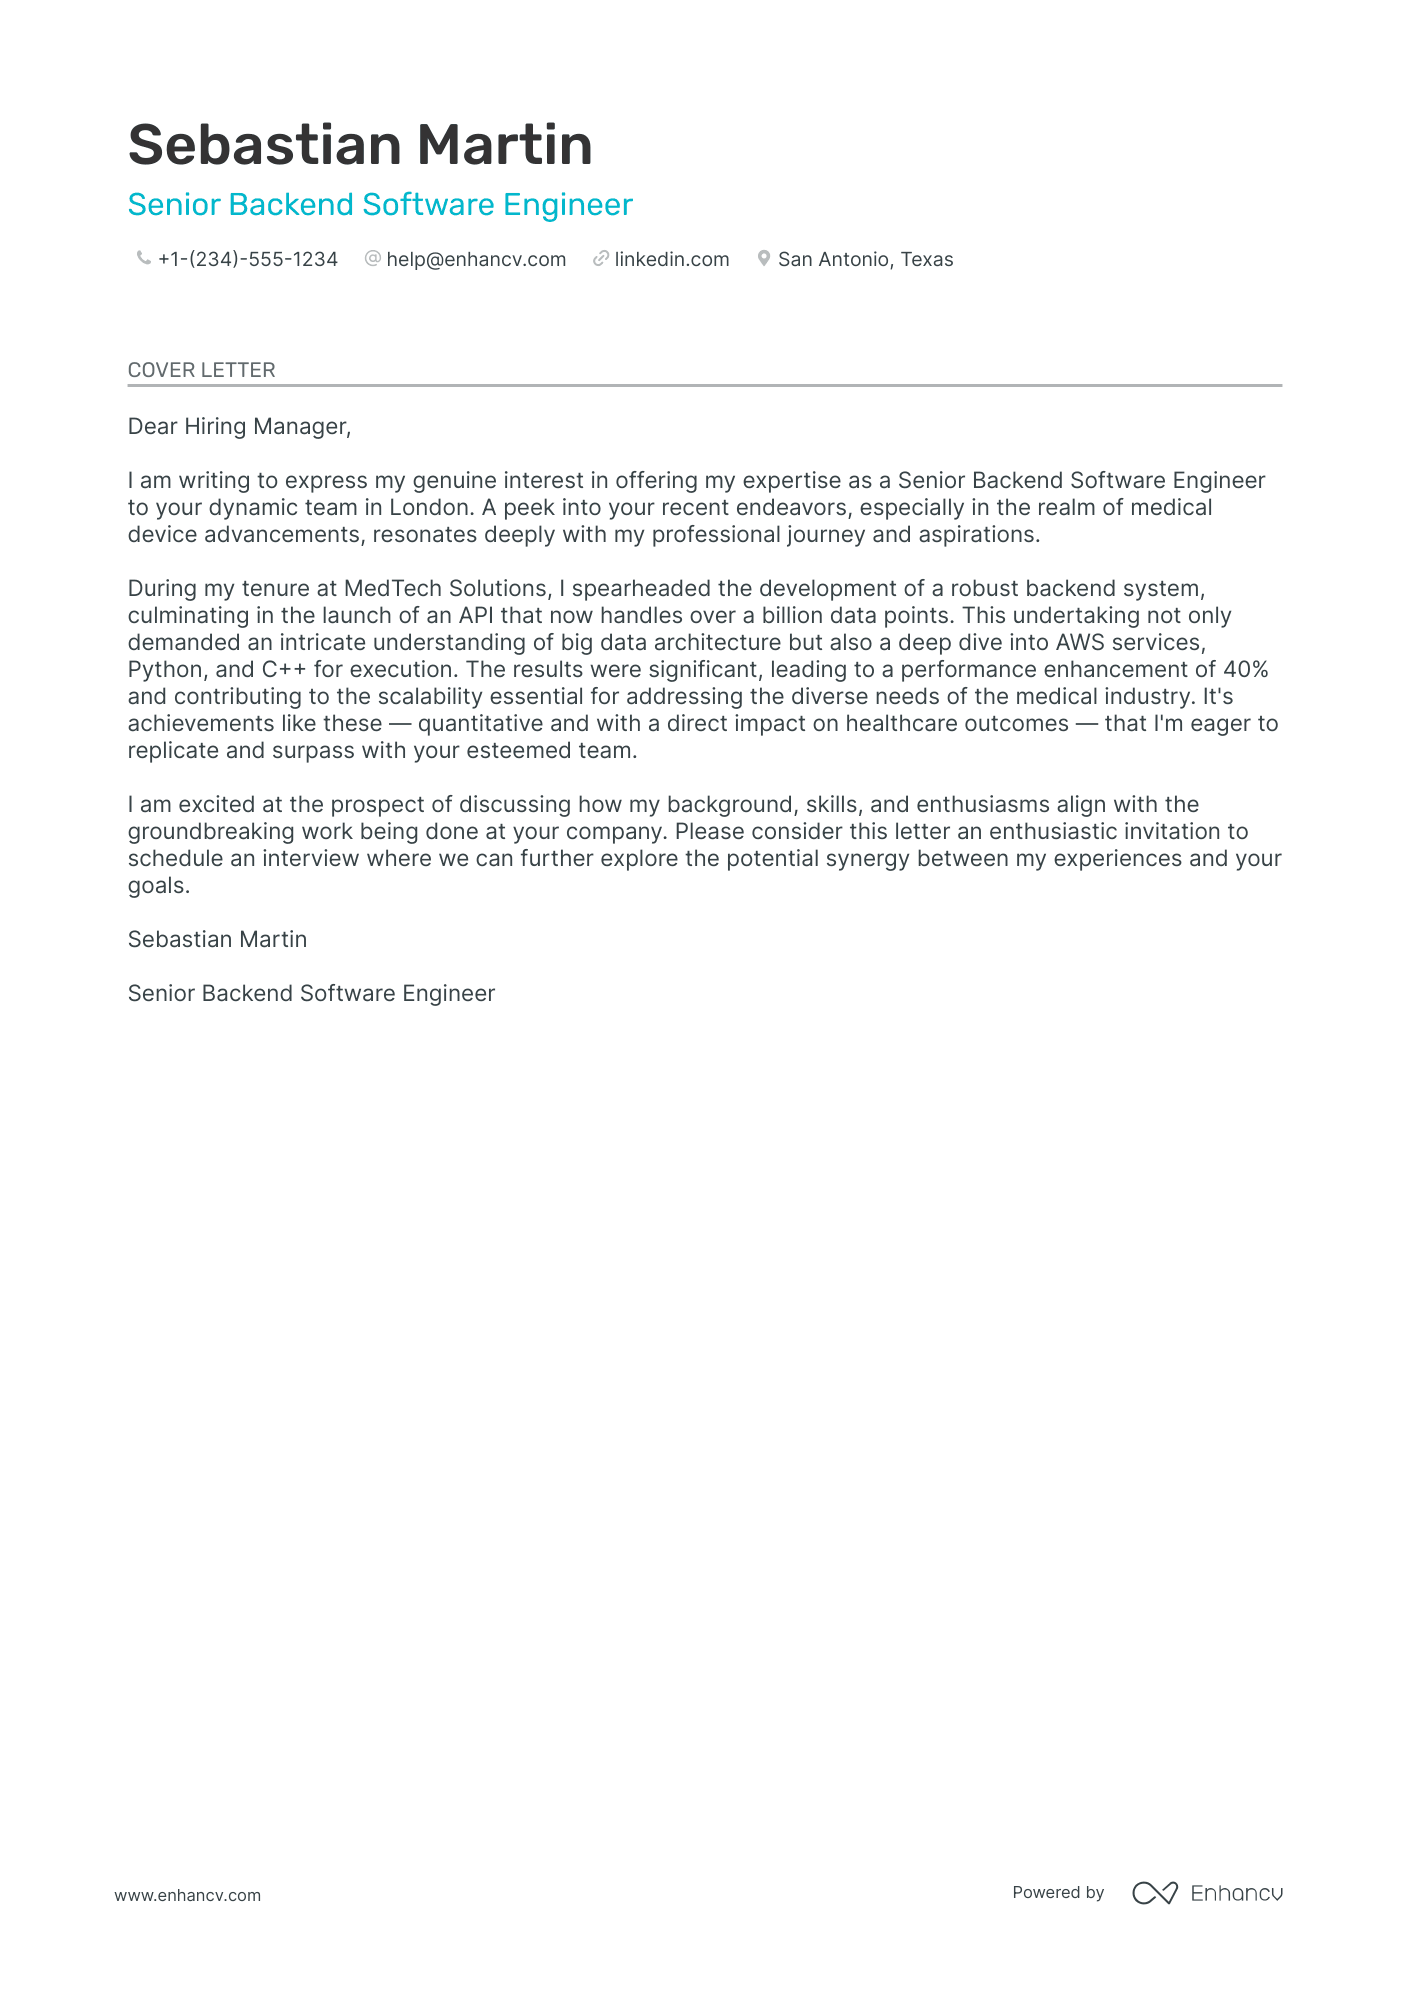 cover letter template bright network